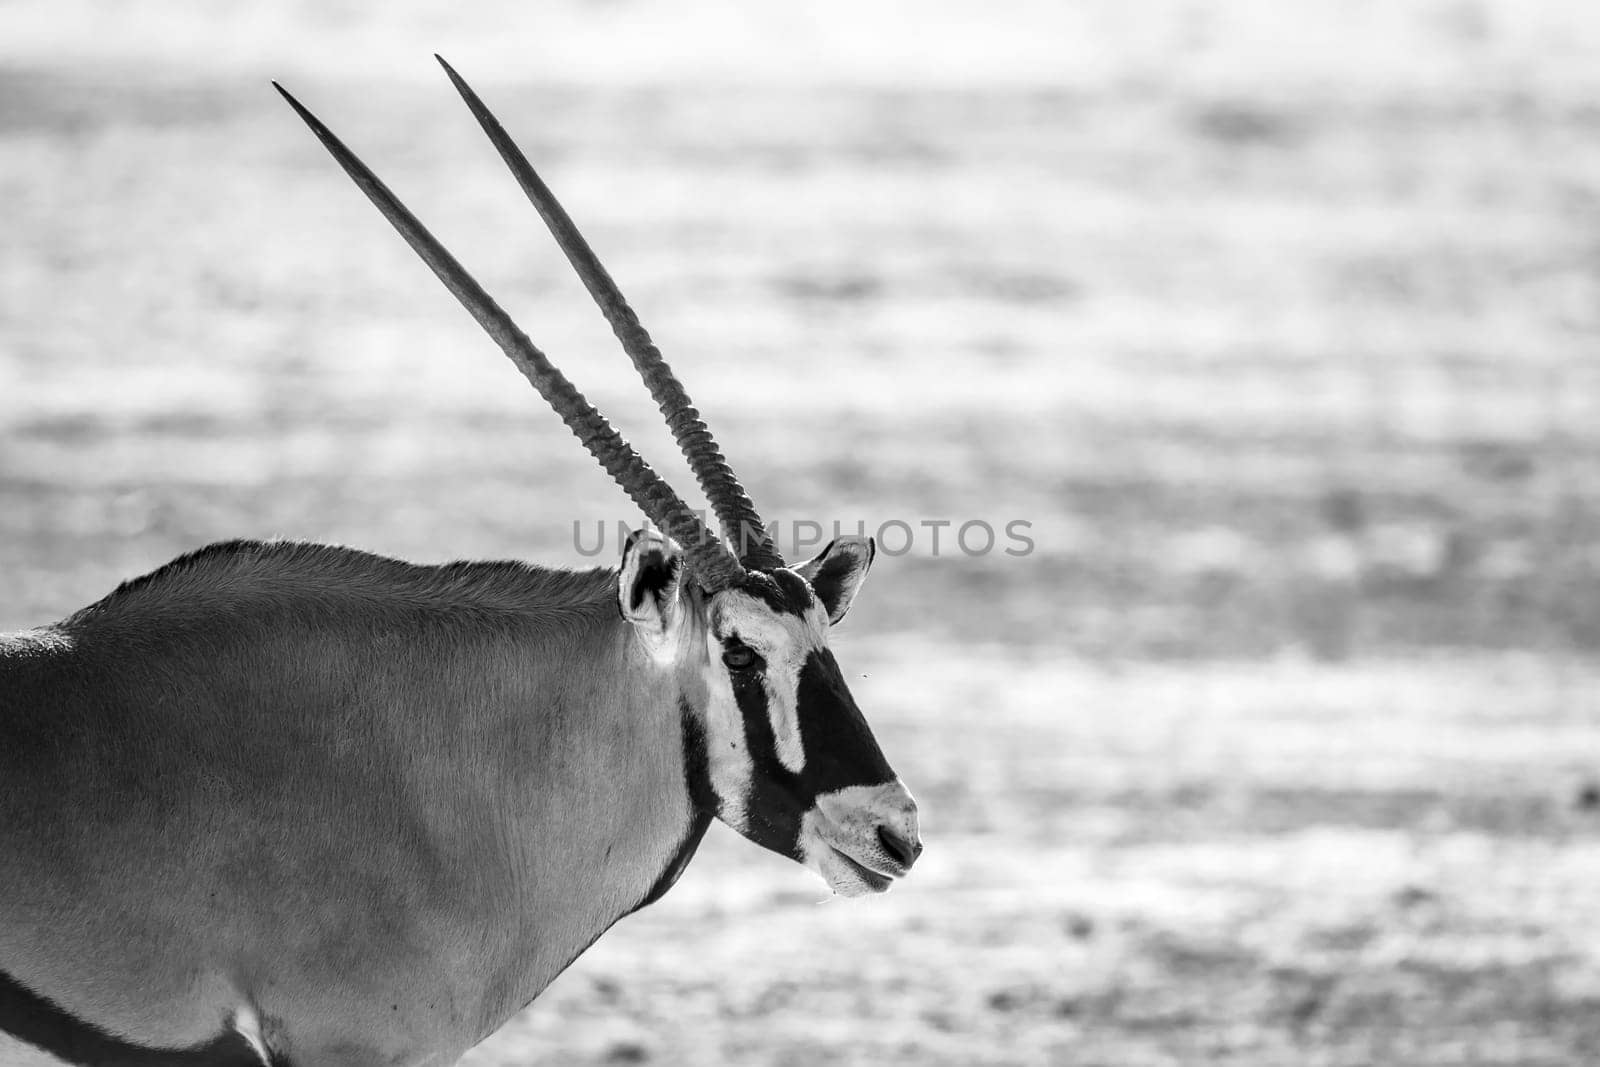 South African Oryx black and white portrait in Kgalagadi transfrontier park, South Africa; specie Oryx gazella family of Bovidae